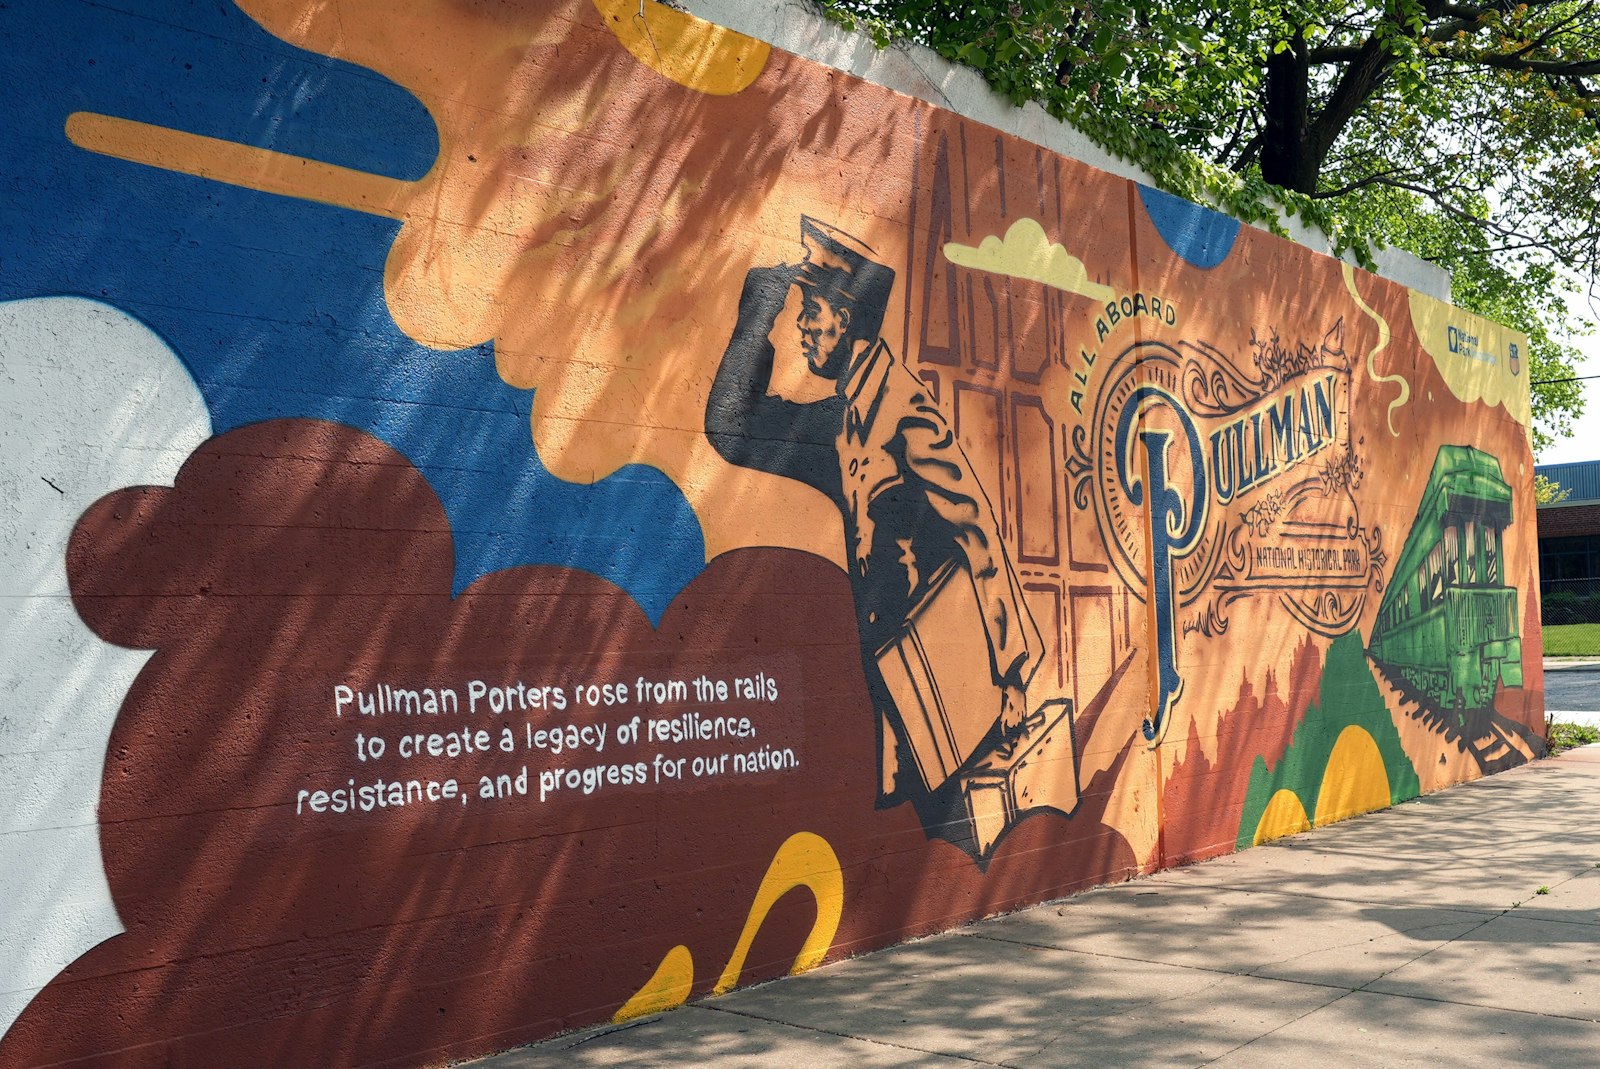 A mural depicting a Pullman porter looking out to the left. Text reads "Pullman Porters rose from the rails to create a legacy of resilience, resistance, and progress for our nation. All abroad Pullman National Historical Park"